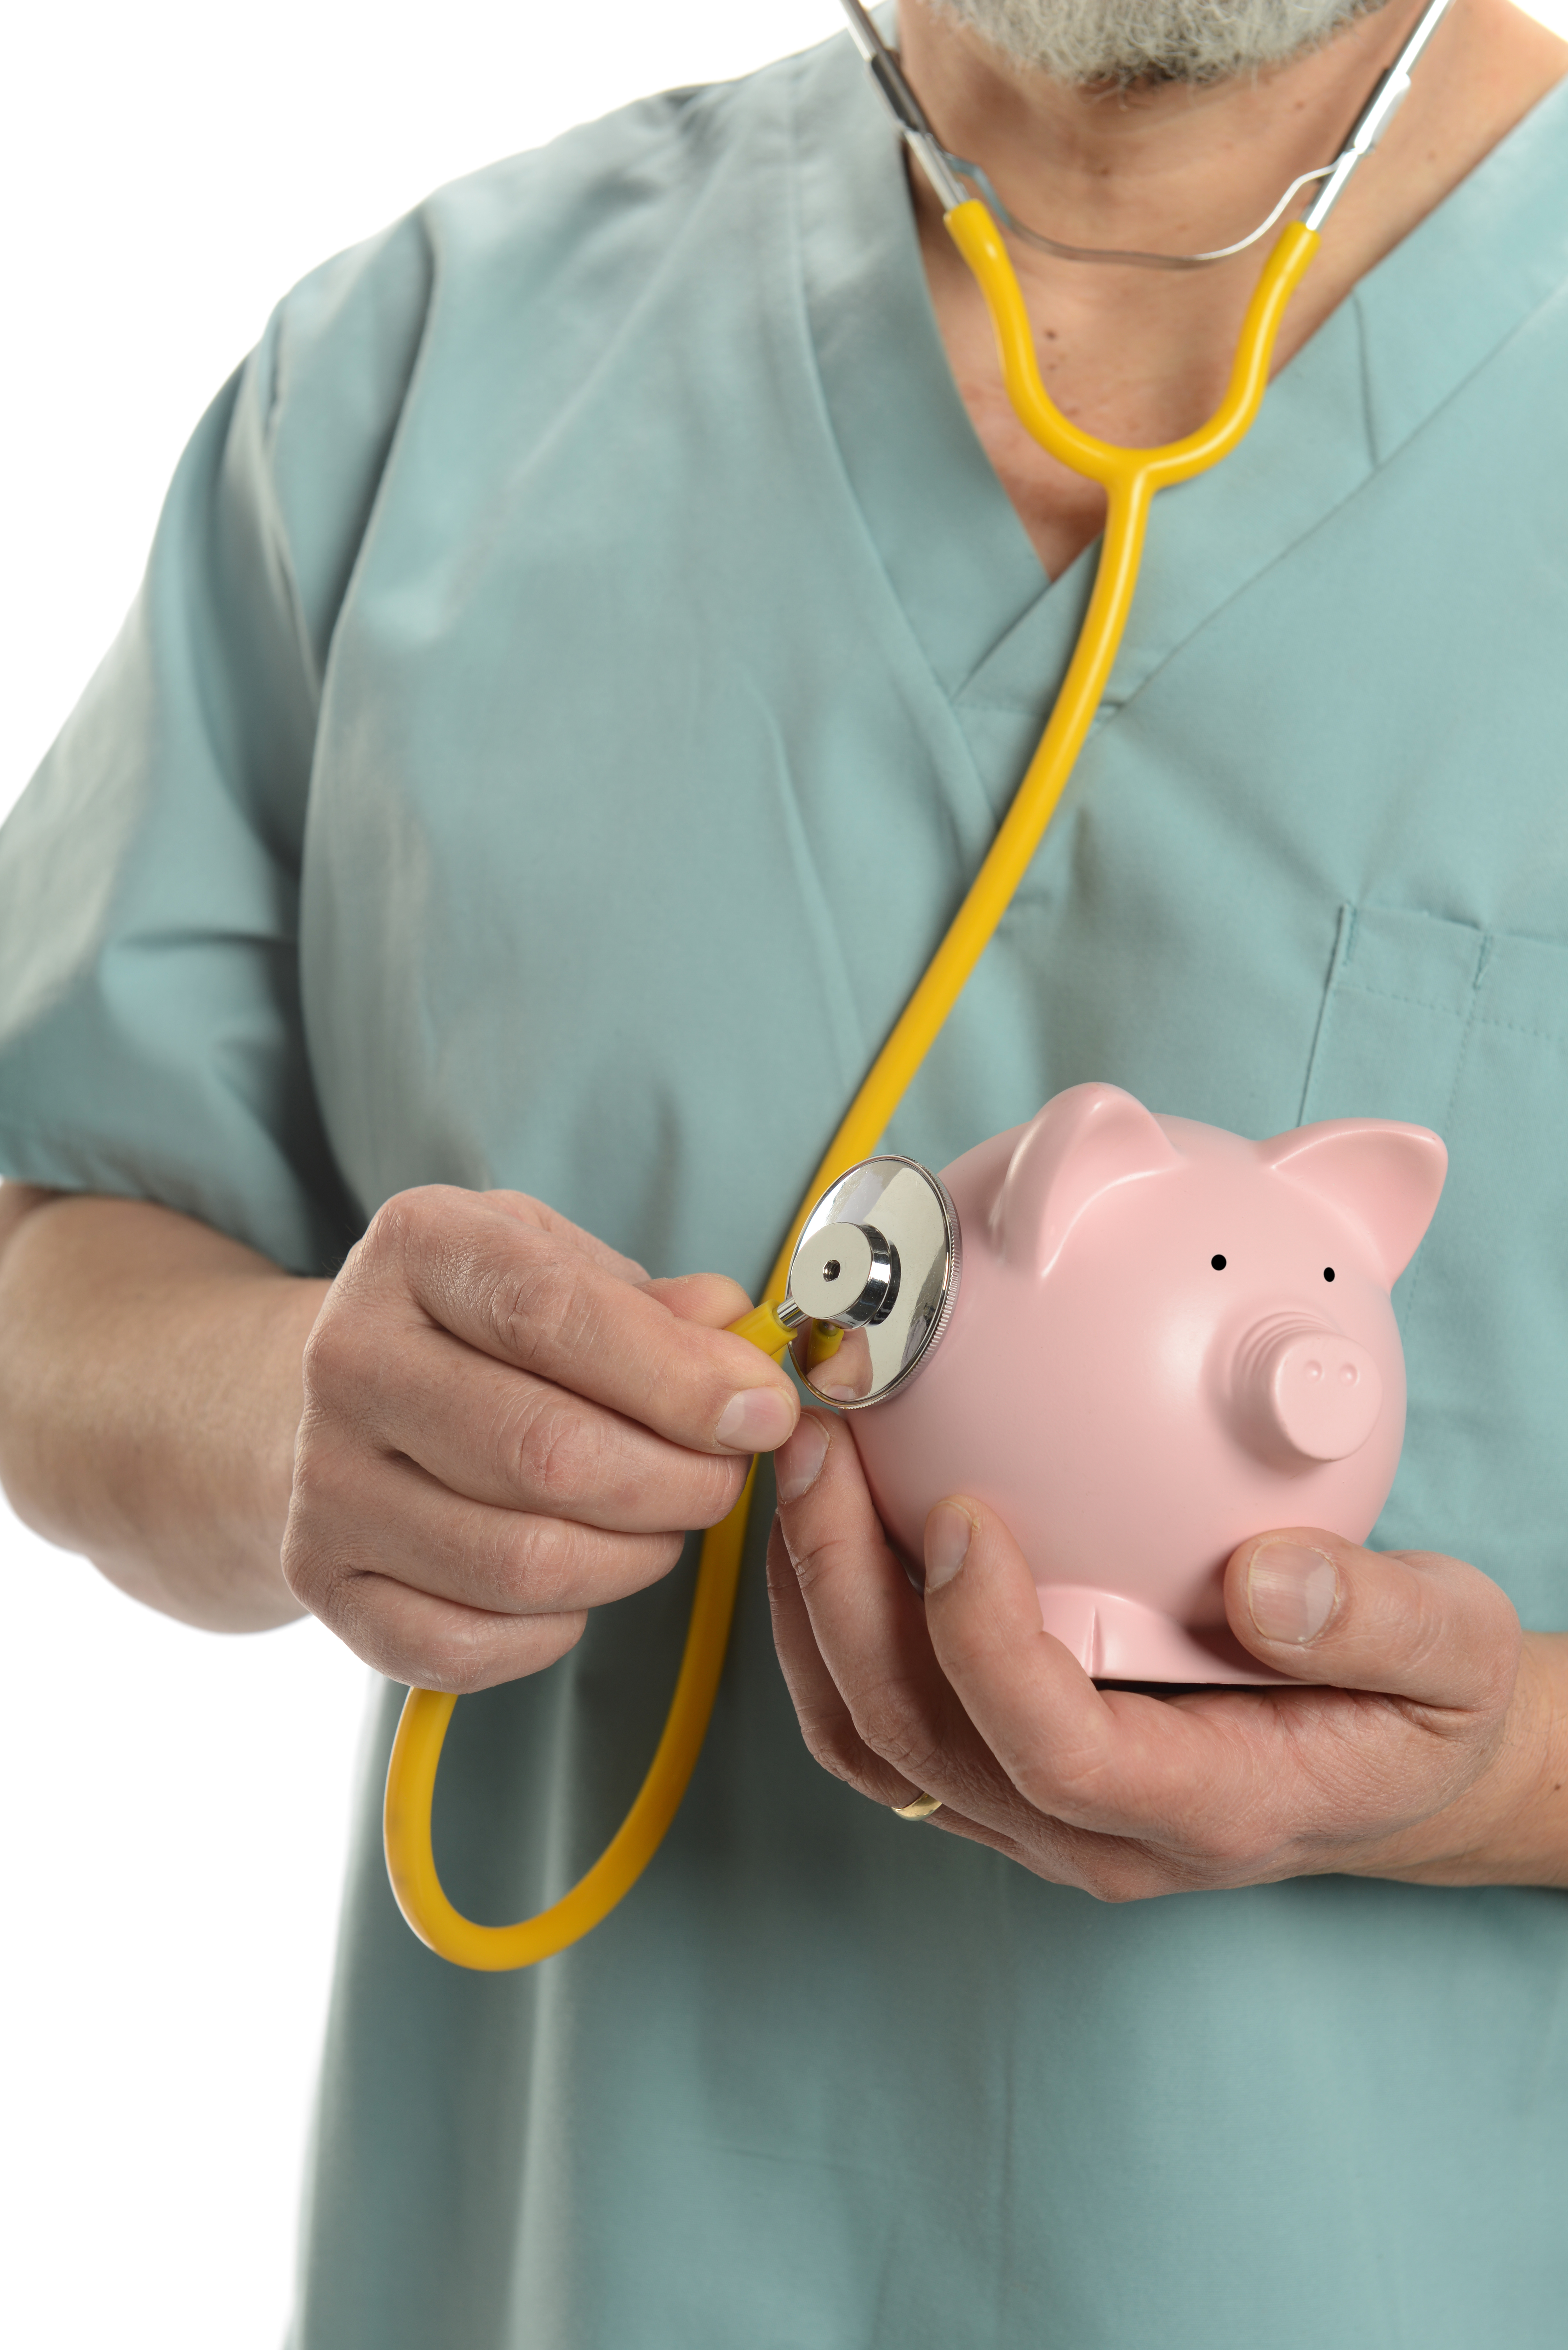 Doctor close up with stethoscope and piggy bank isplated on a white background